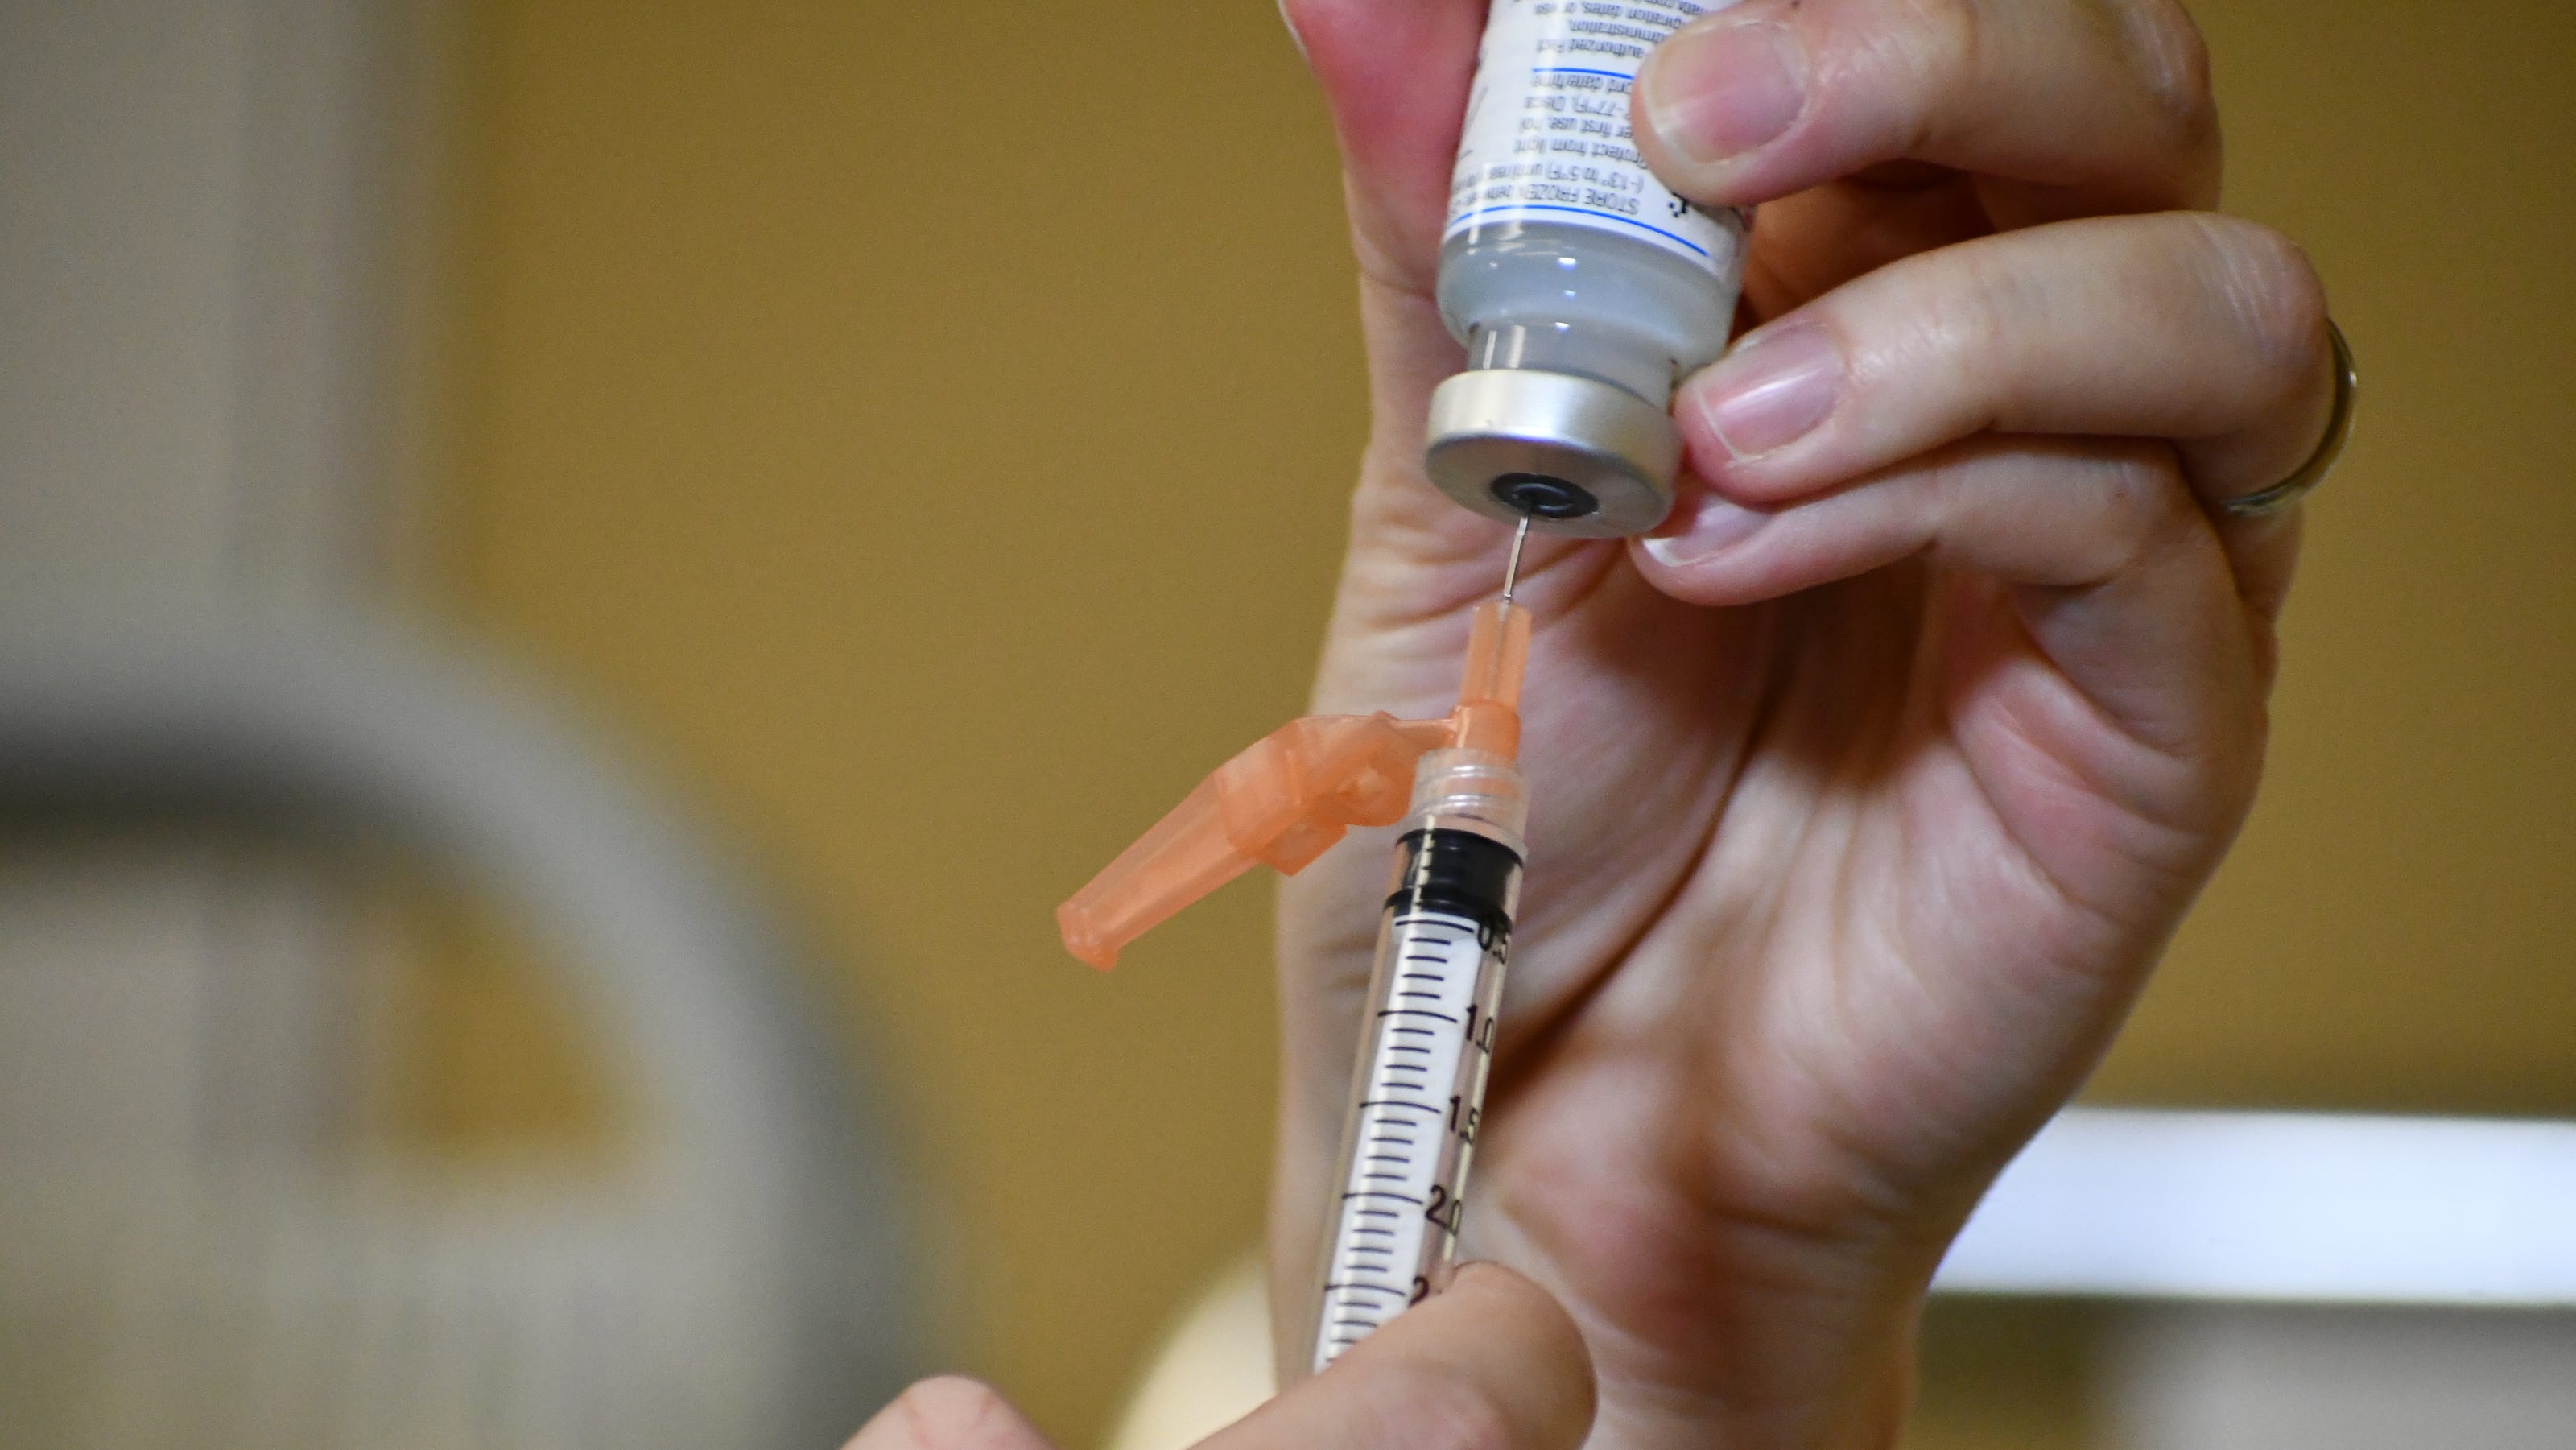 Here's a running list of COVID-19 vaccination sites in the Wausau and Merrill areas